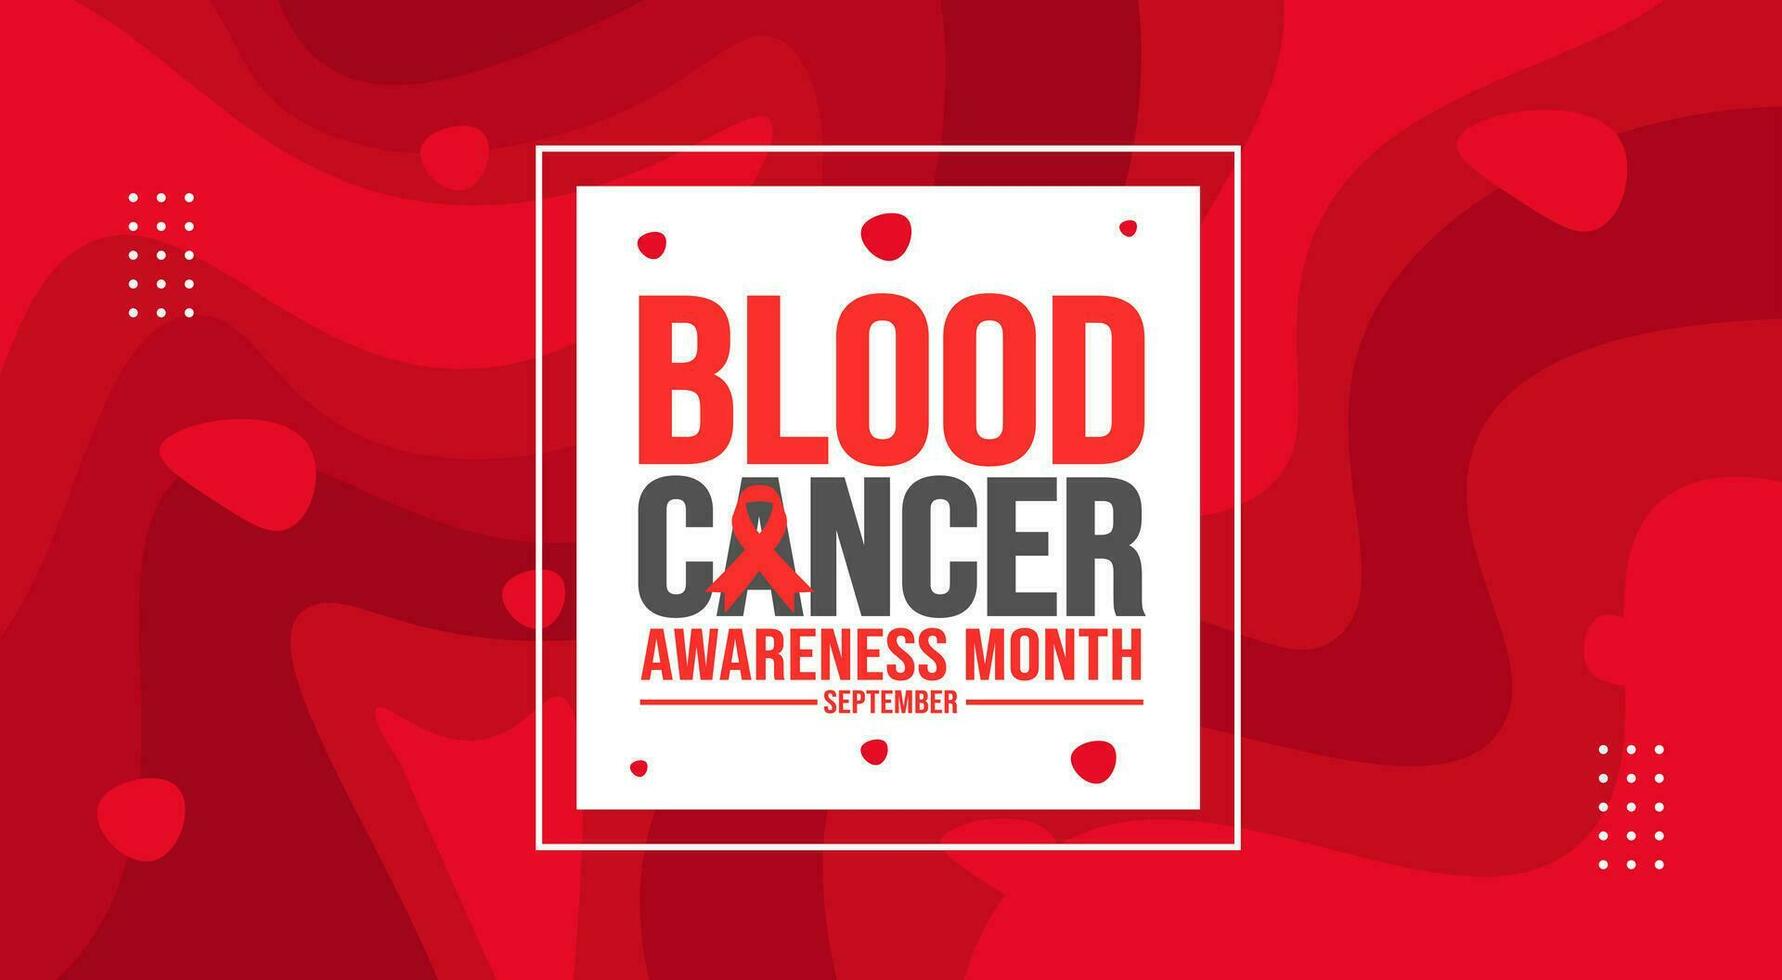 September is Blood Cancer Awareness Month background template. Holiday concept. background, banner, placard, card, and poster design template with text inscription and standard color. vector